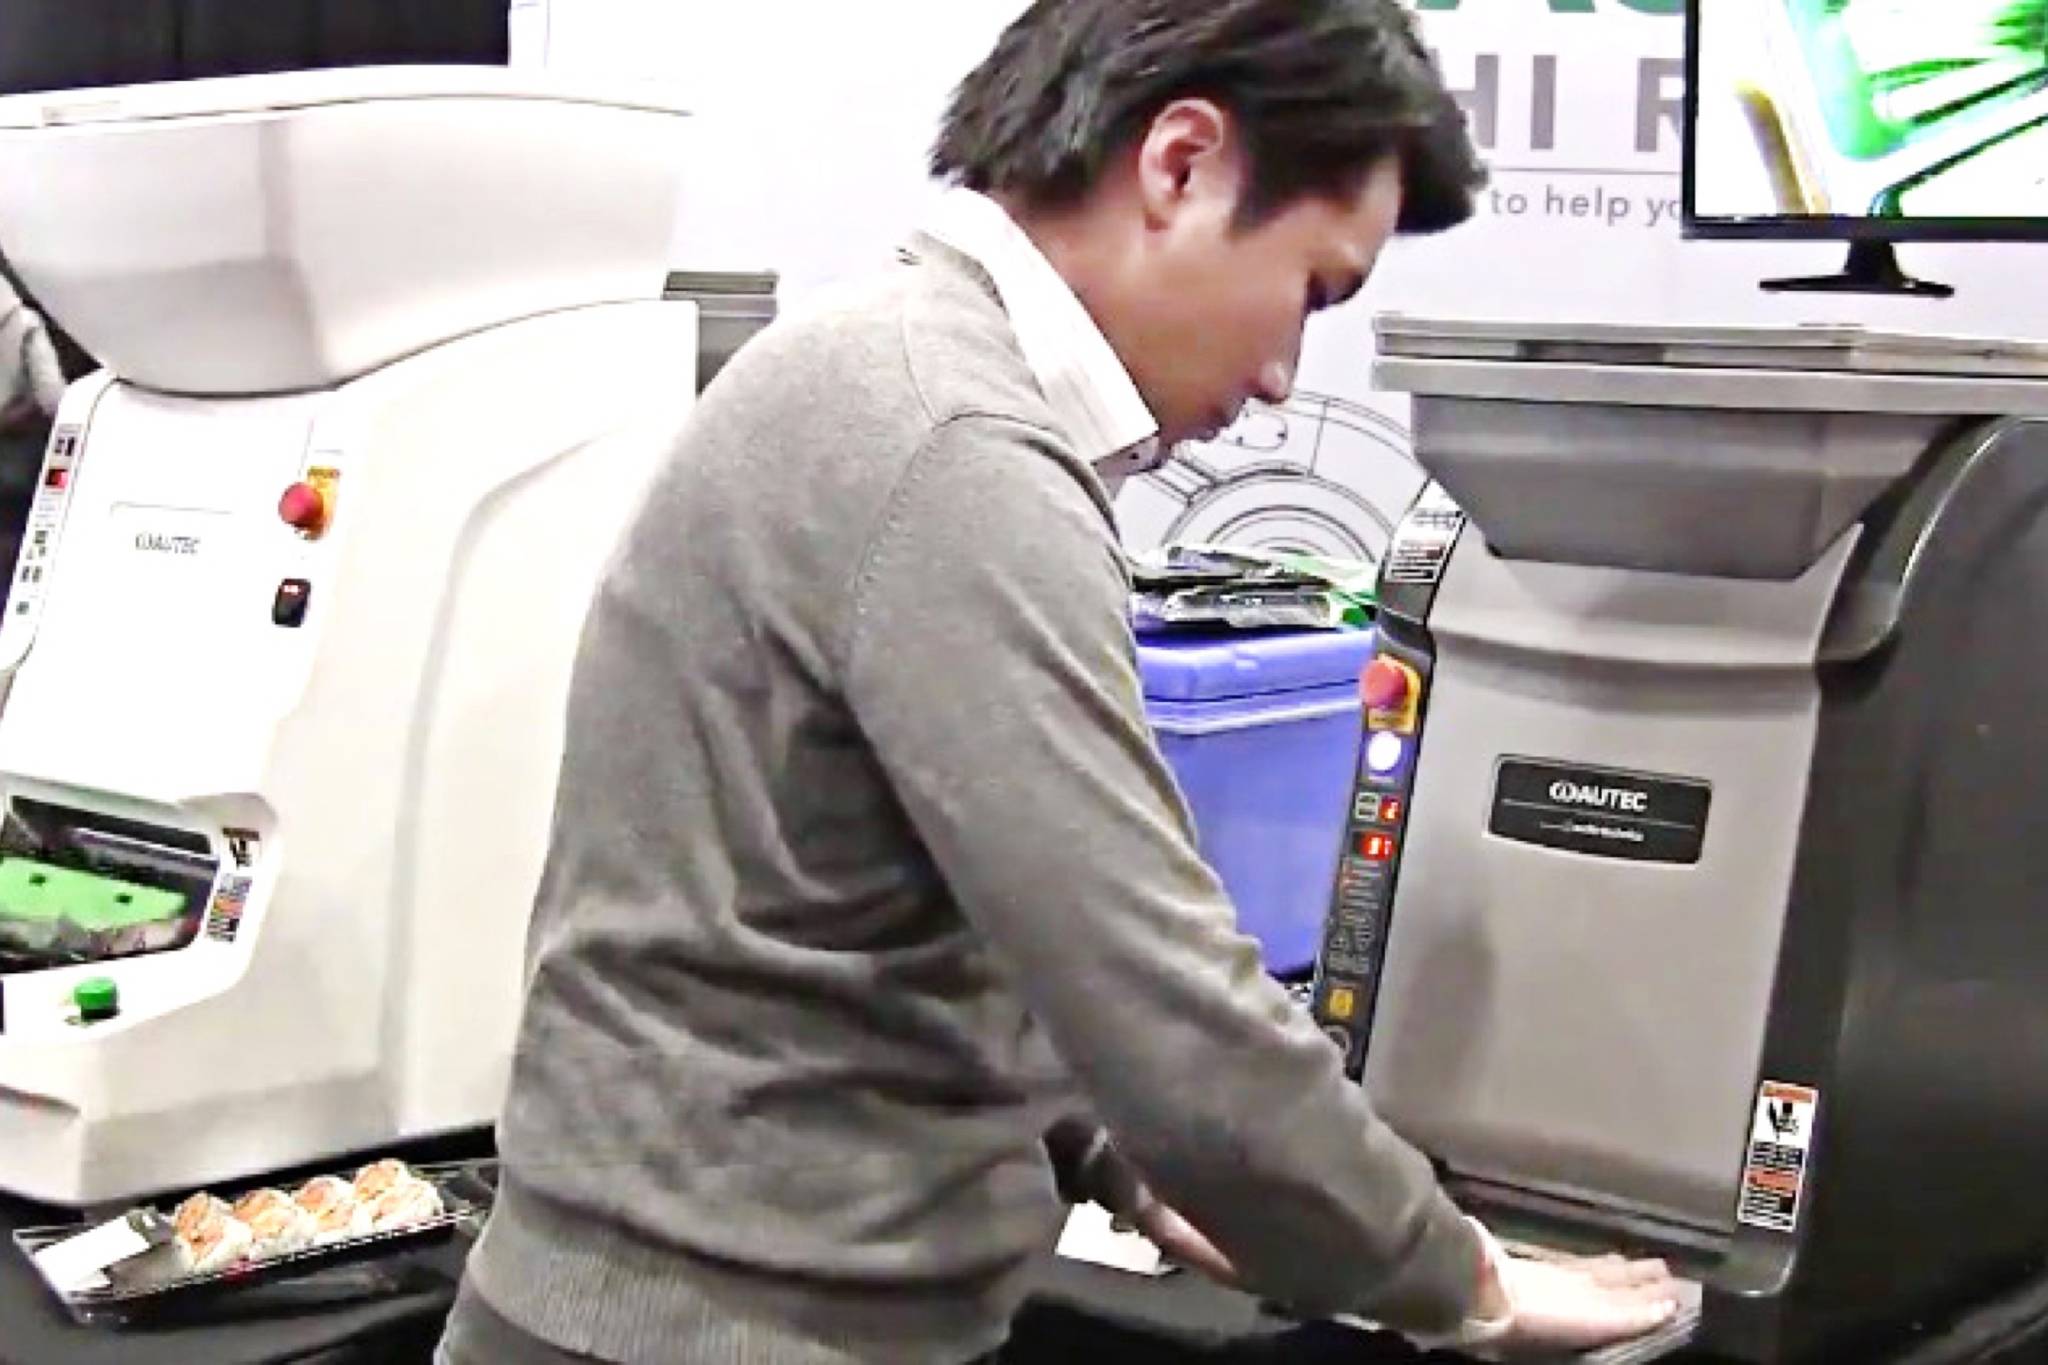 Sushi-making robots among tech on display at foodservice trade show